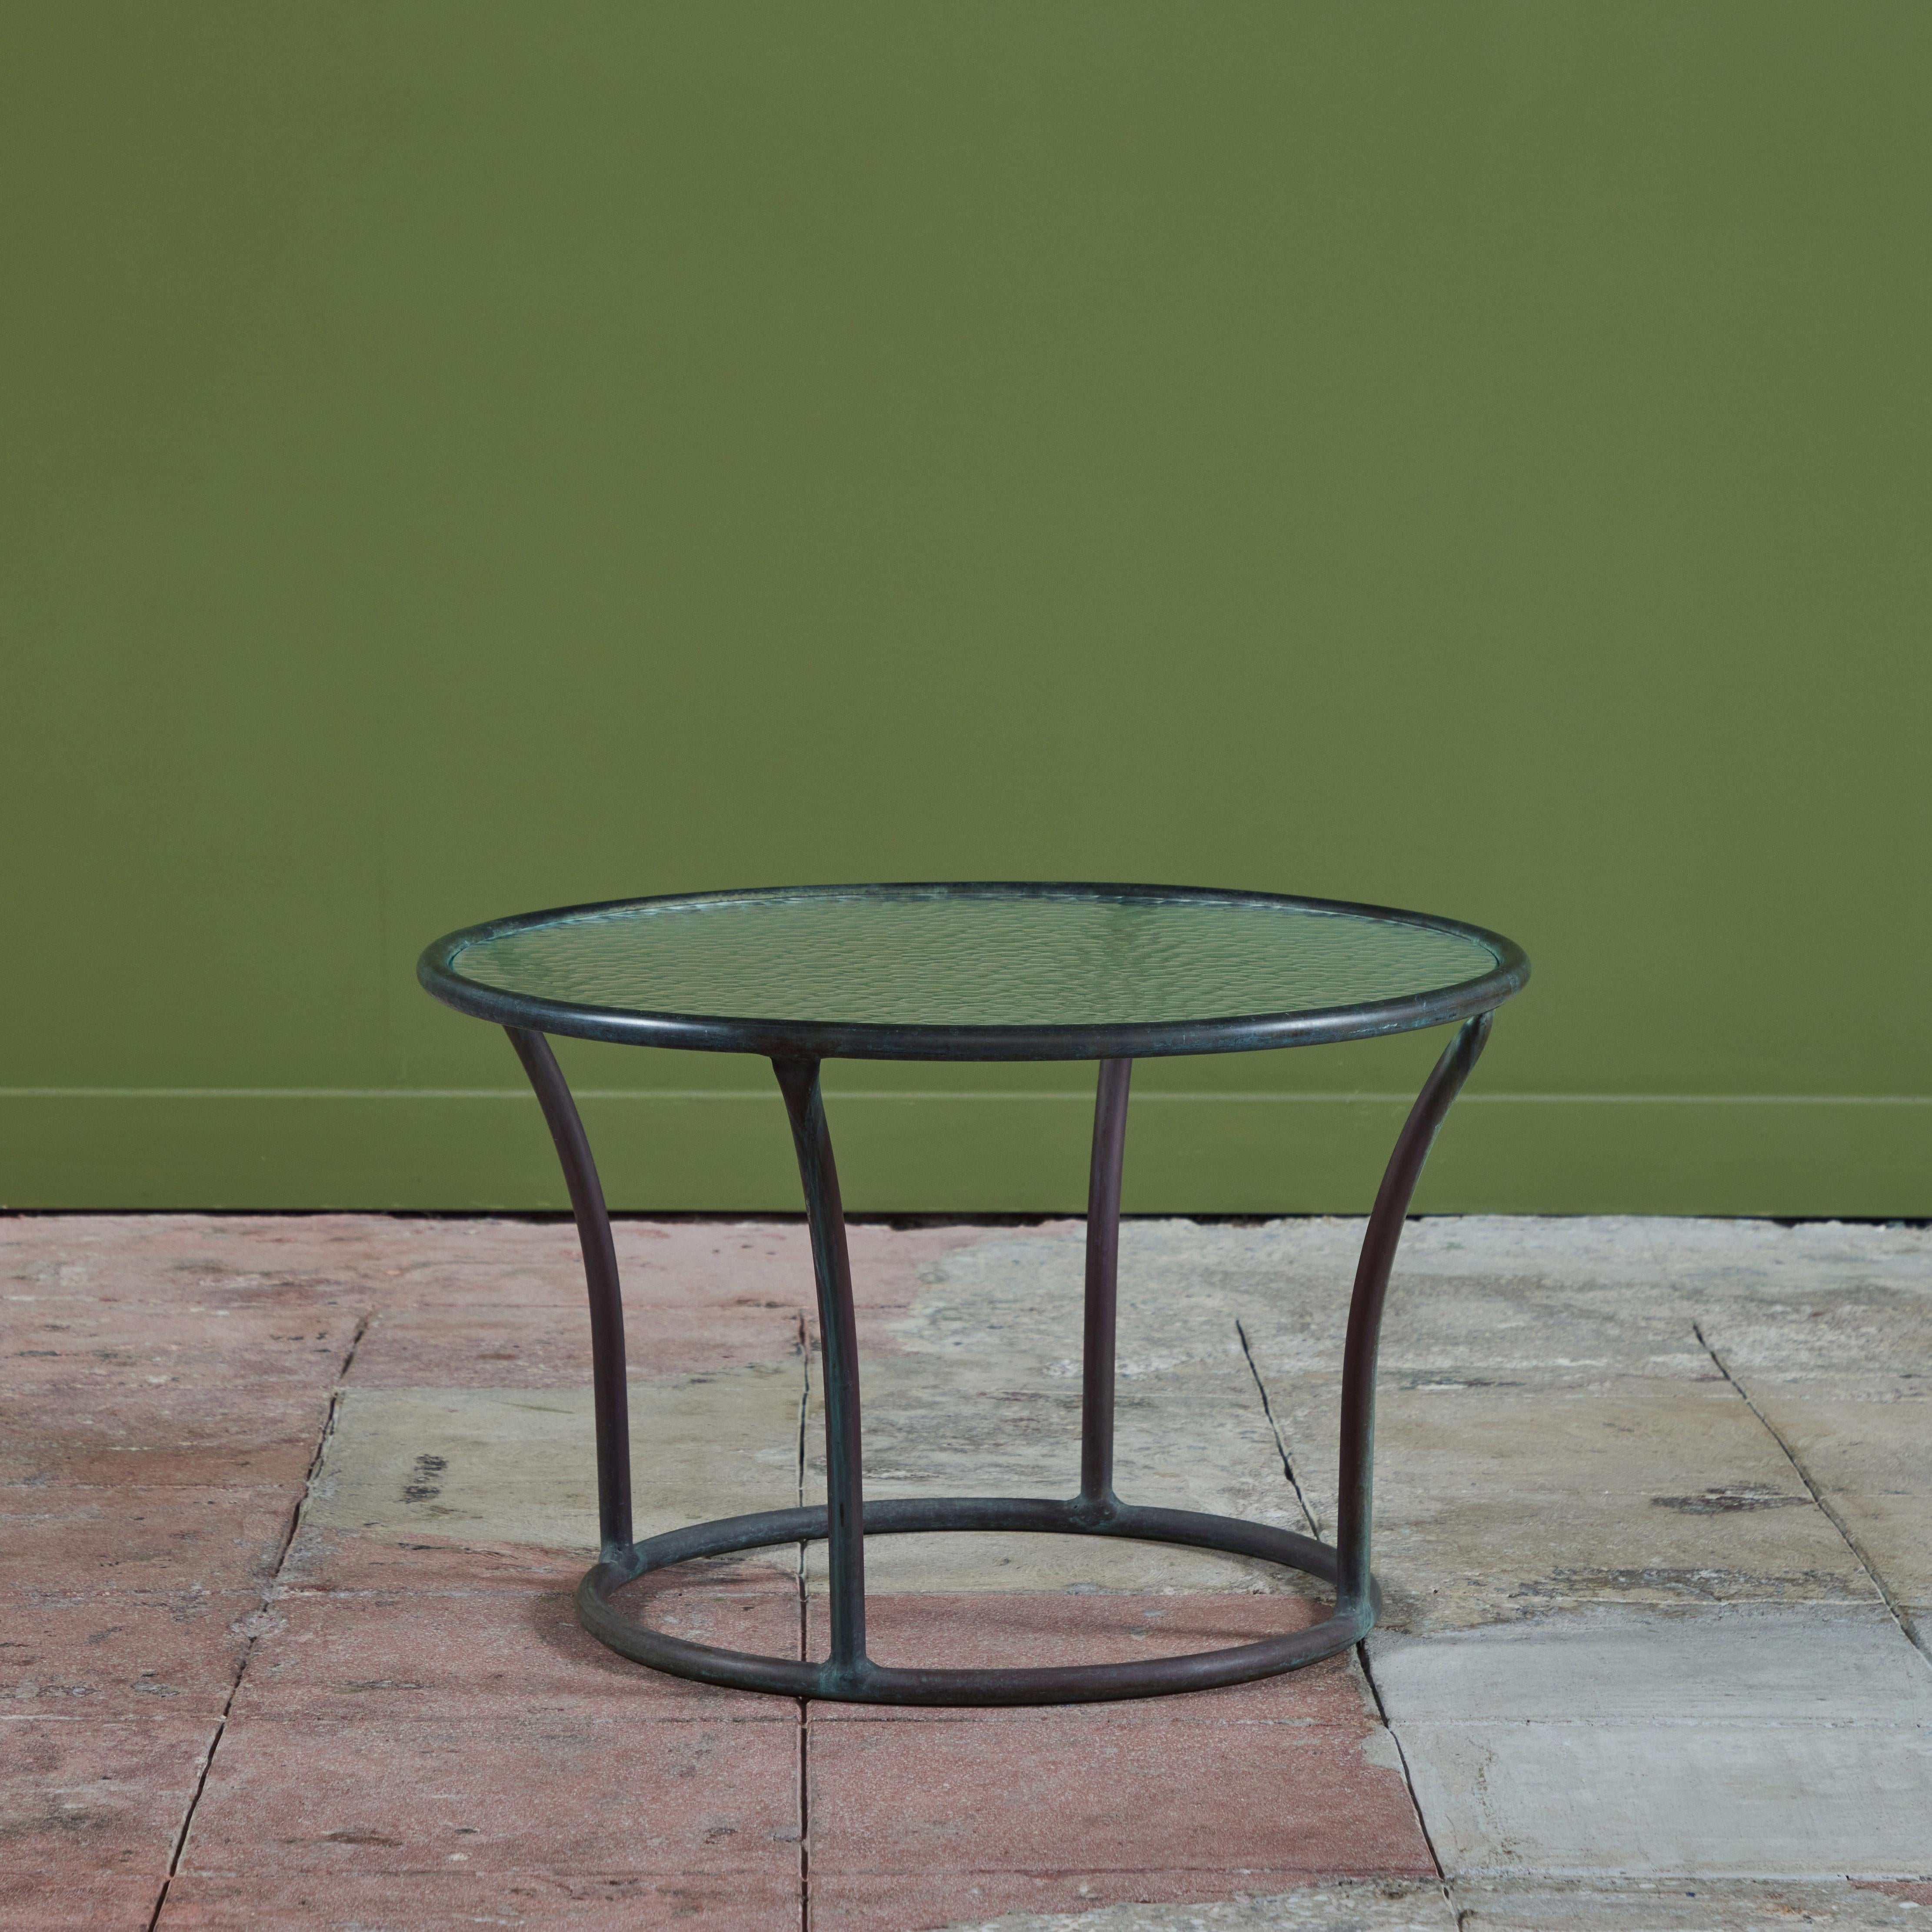 Round bronze side table with glass top by Kipp Stewart for Terra of California, USA, c.1970s. The table features four patinated bronze tubing legs which attach the round frame of the table top and base.

Dimensions
24.5